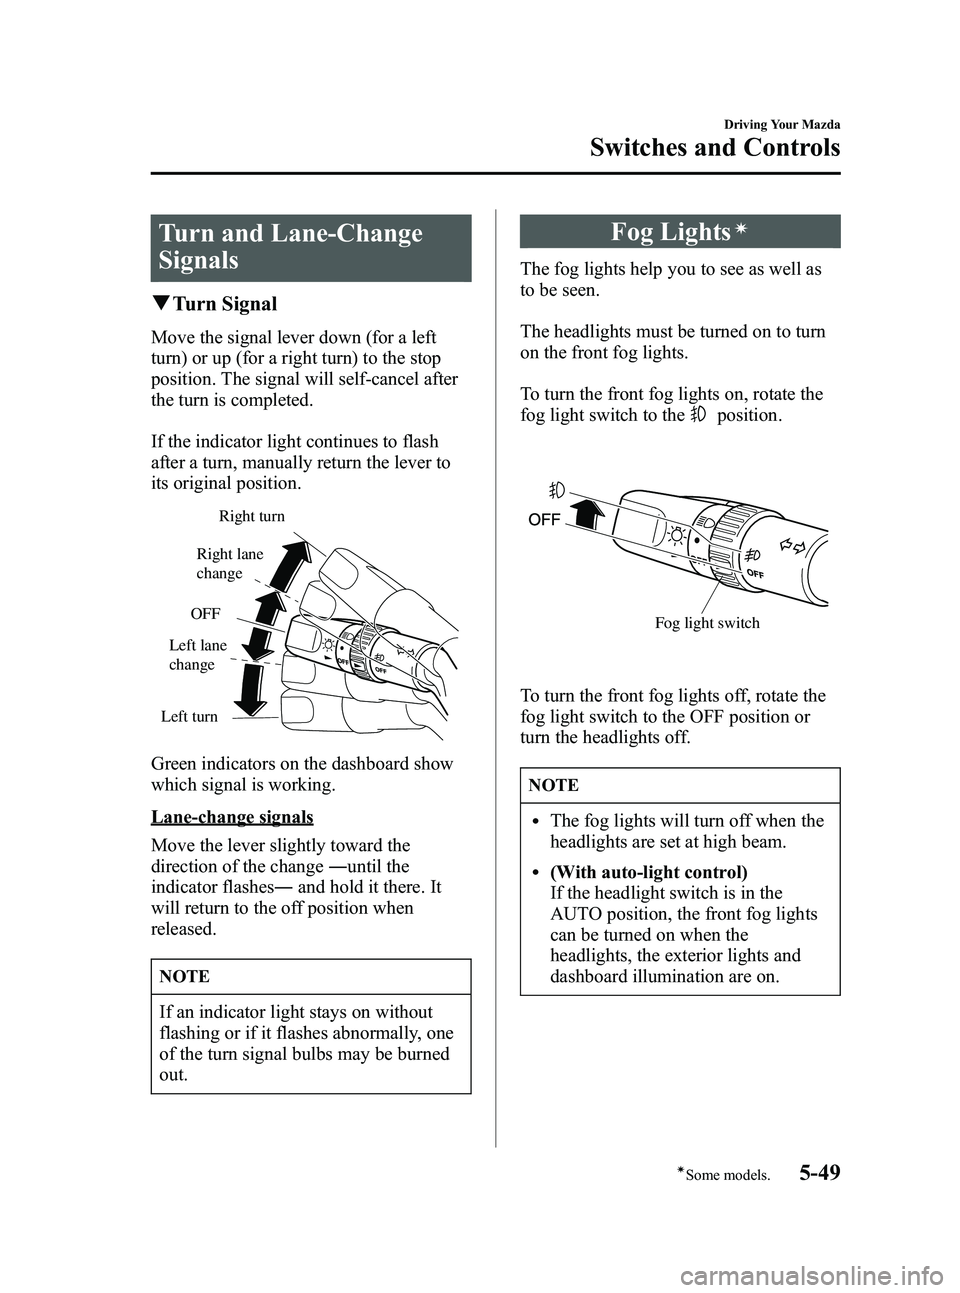 MAZDA MODEL 5 2006  Owners Manual Black plate (163,1)
Turn and Lane-Change
Signals
qTurn Signal
Move the signal lever down (for a left
turn) or up (for a right turn) to the stop
position. The signal will self-cancel after
the turn is 